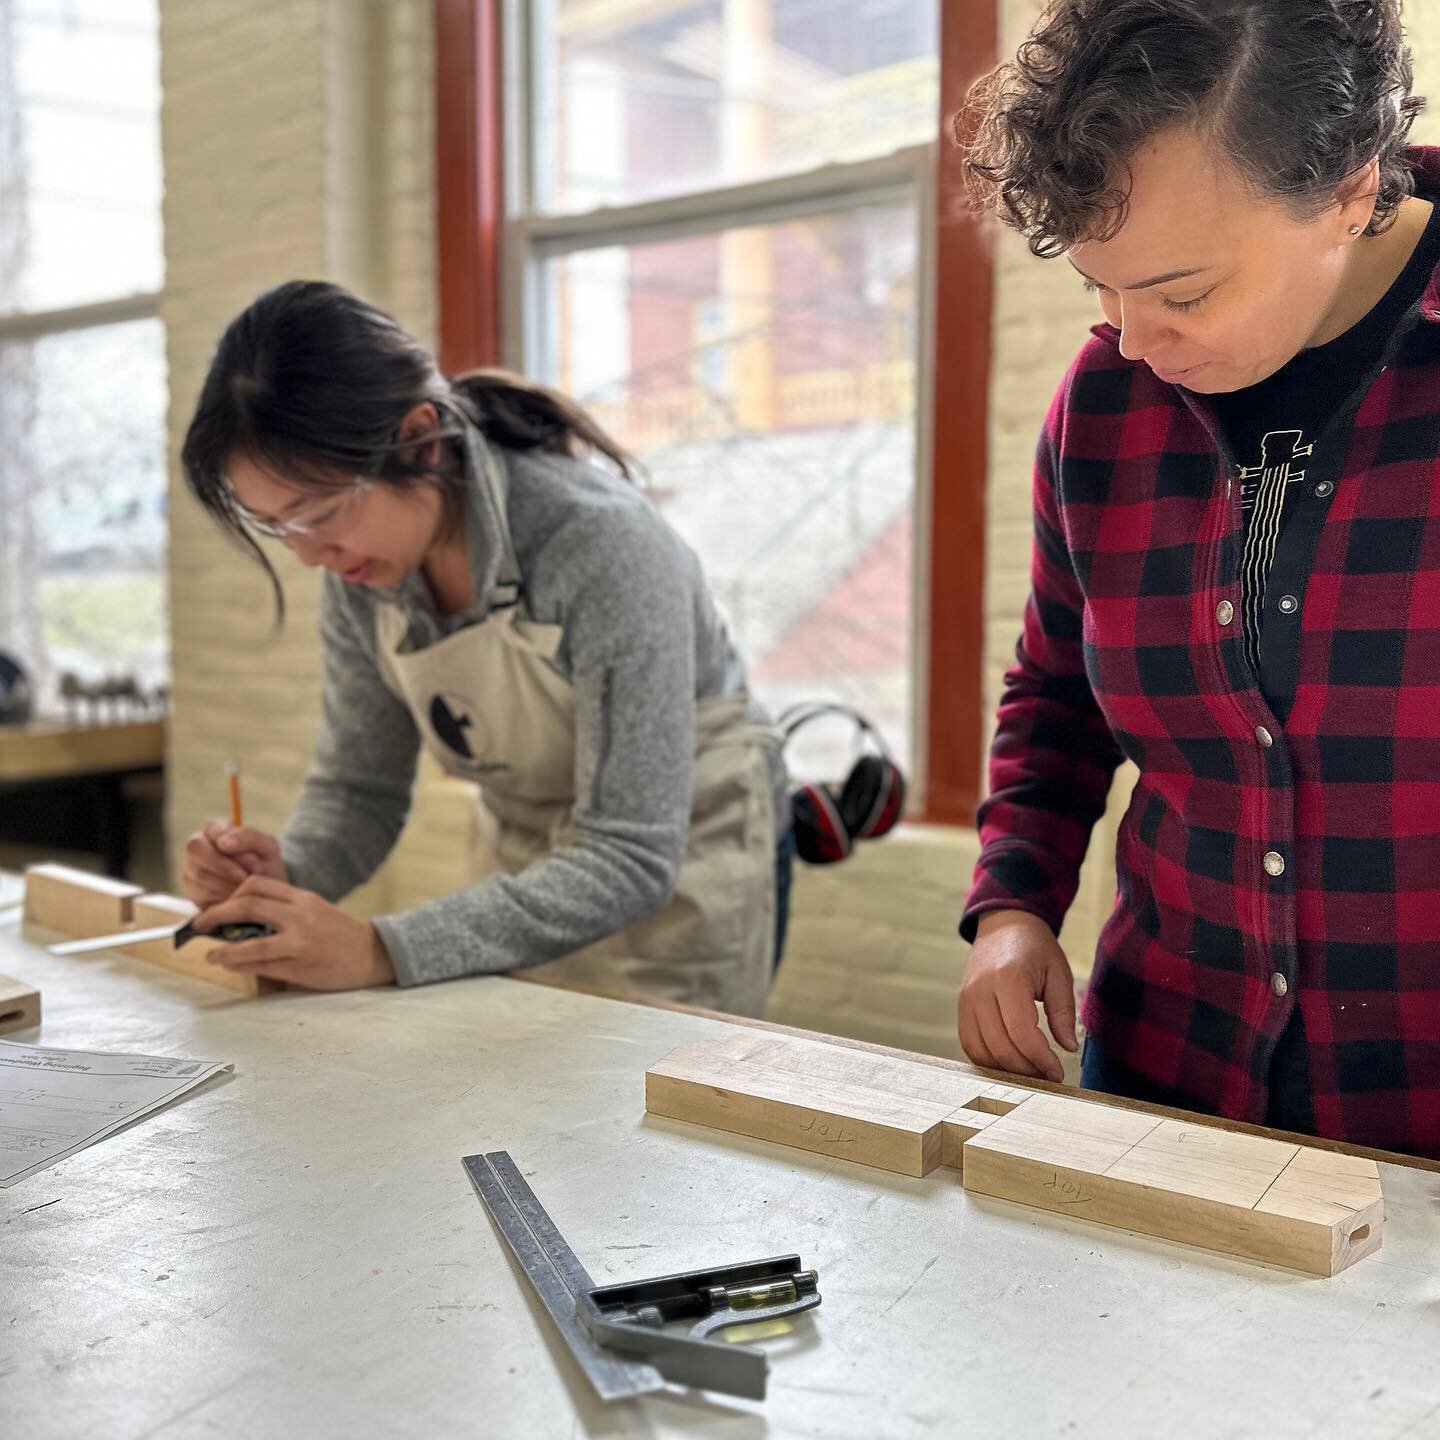 There is one space that just opened up in my coffee table class starting next week. Come learn woodworking with me and @curiositywoodworks ! Tues &amp; Thurs evenings 5-8pm. Beginner level. Open to women, trans and non-binary people. Register @hatchs